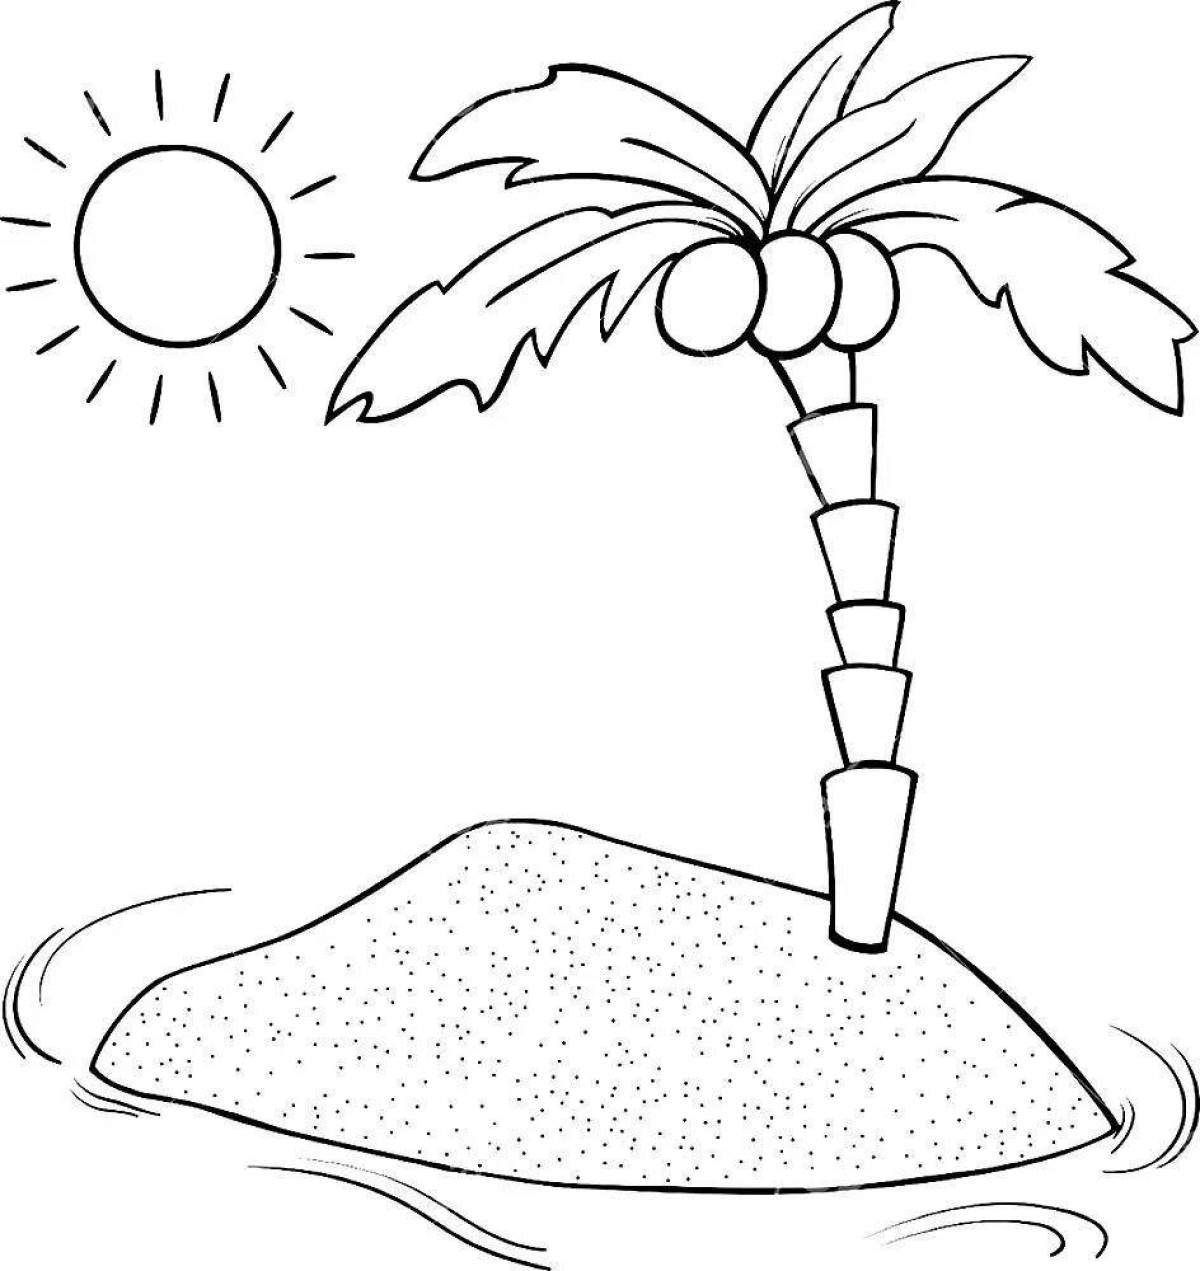 Shiny island coloring book for kids